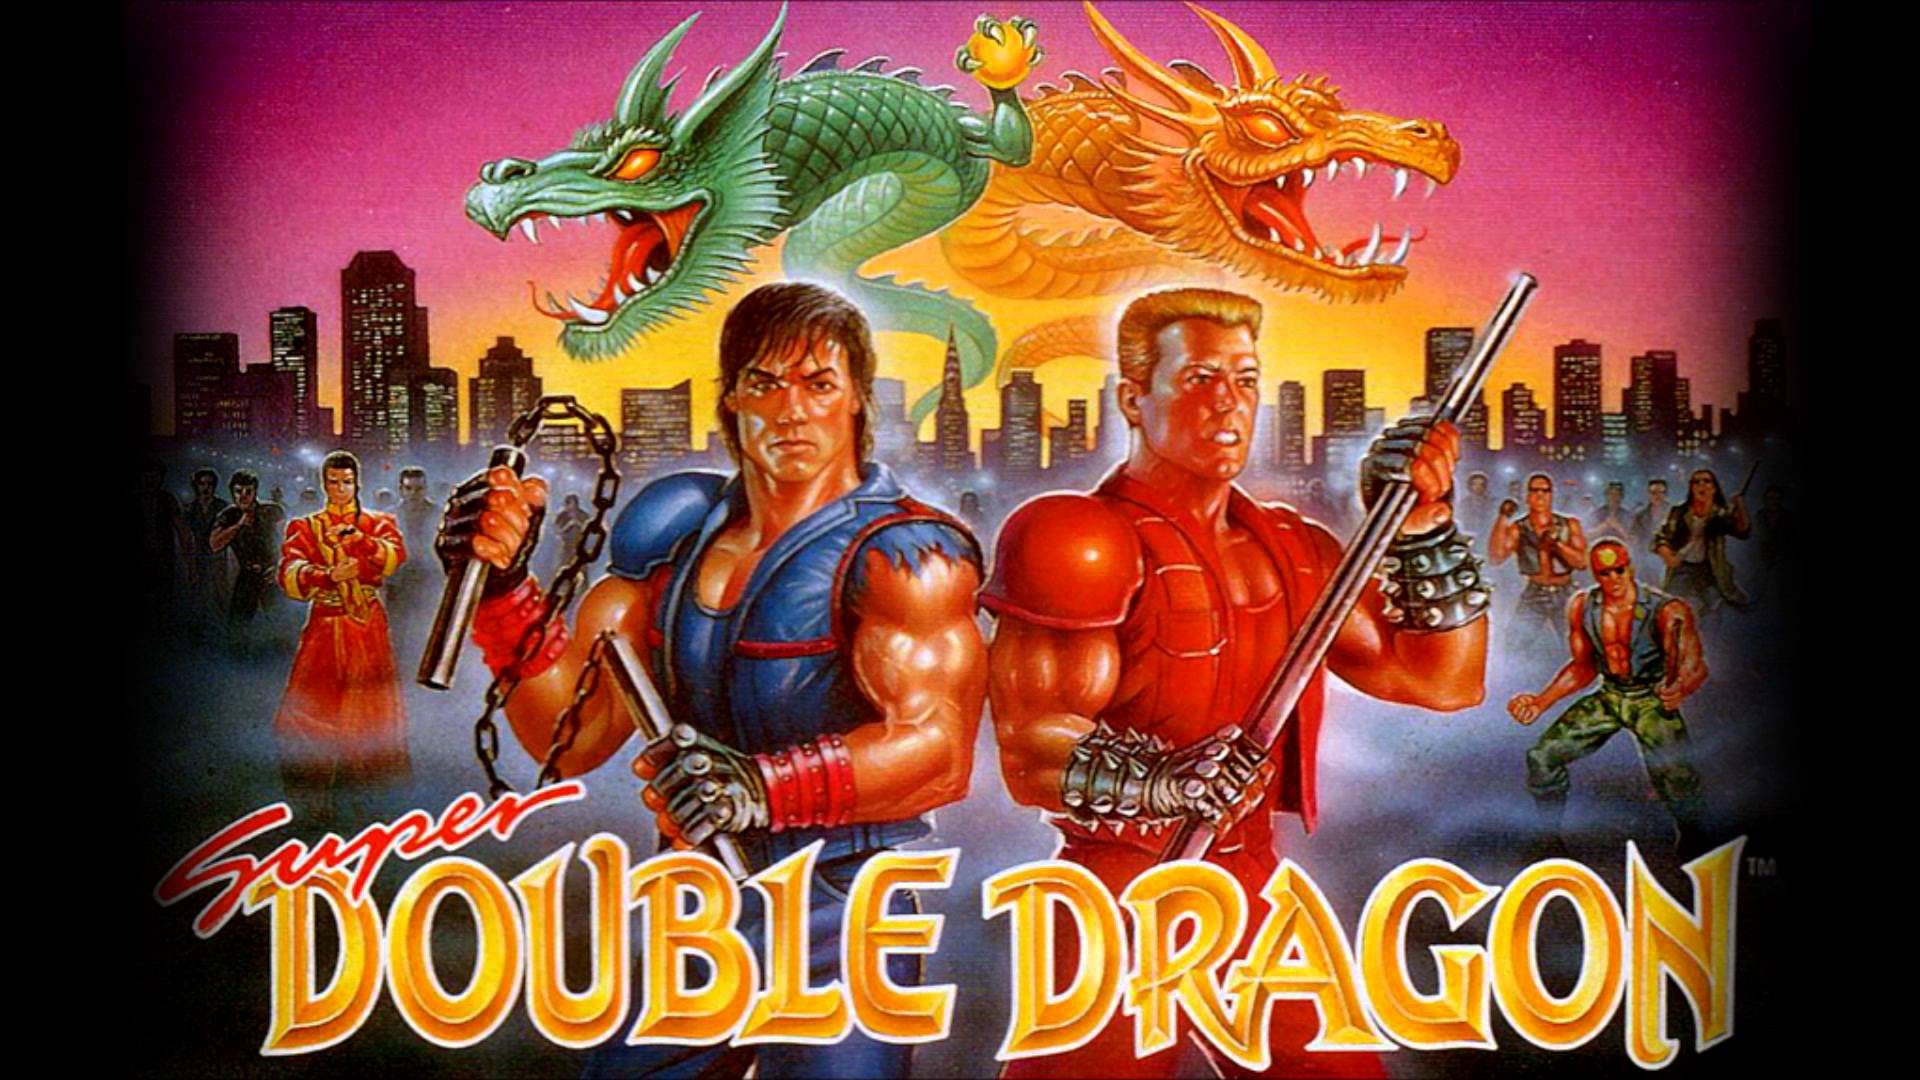 High Resolution Wallpaper | Double Dragon 1920x1080 px